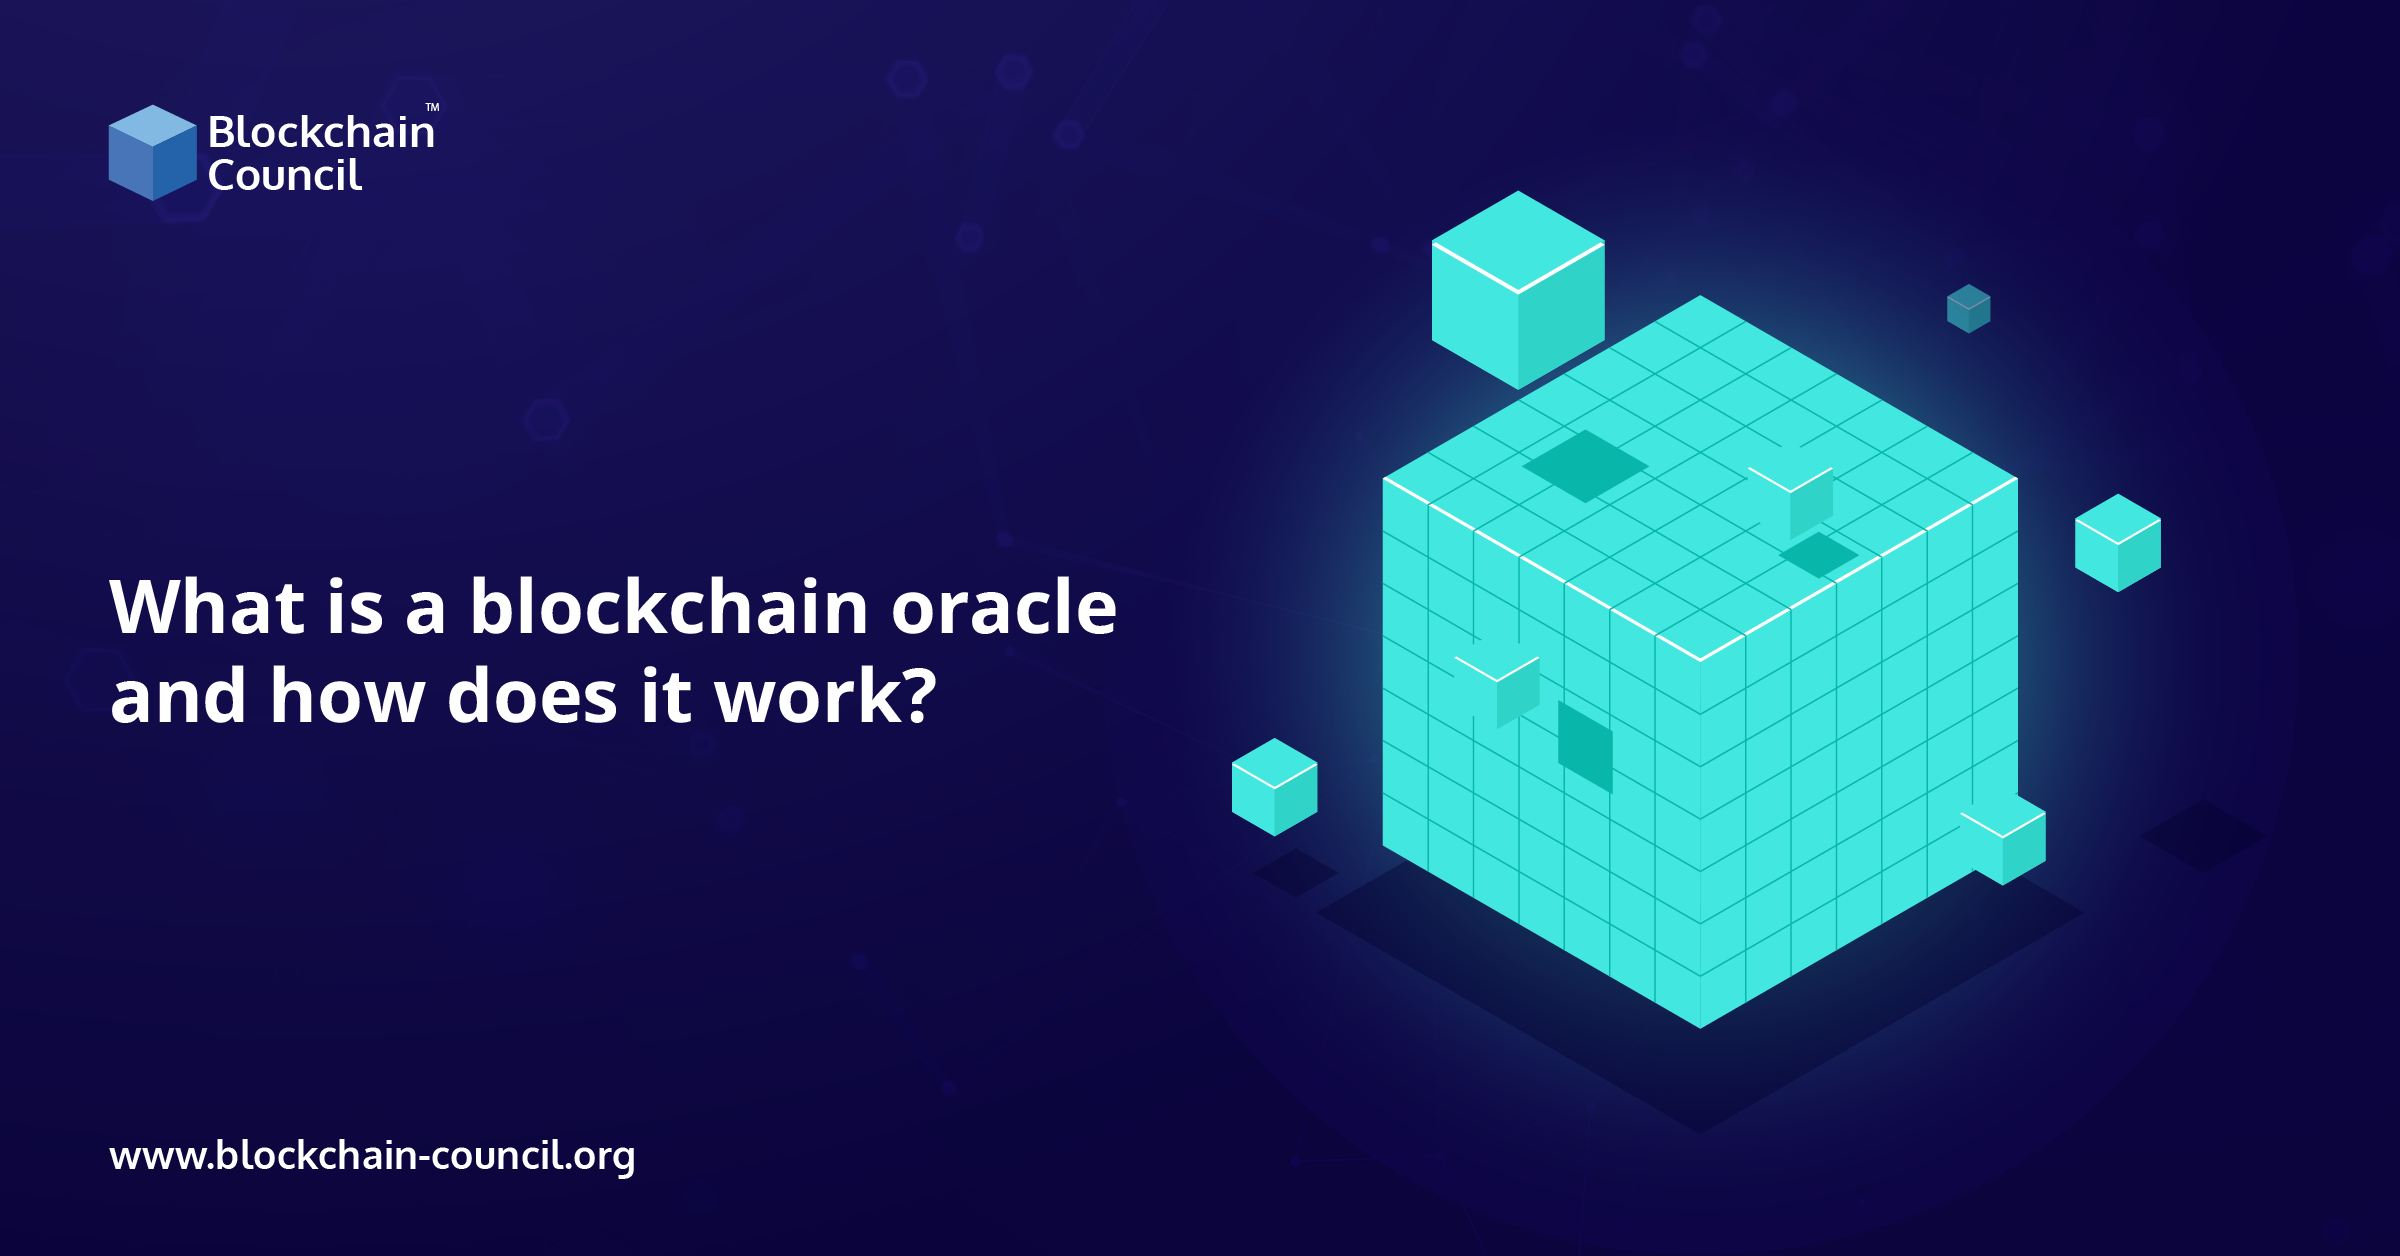 What is a blockchain oracle and how does it work